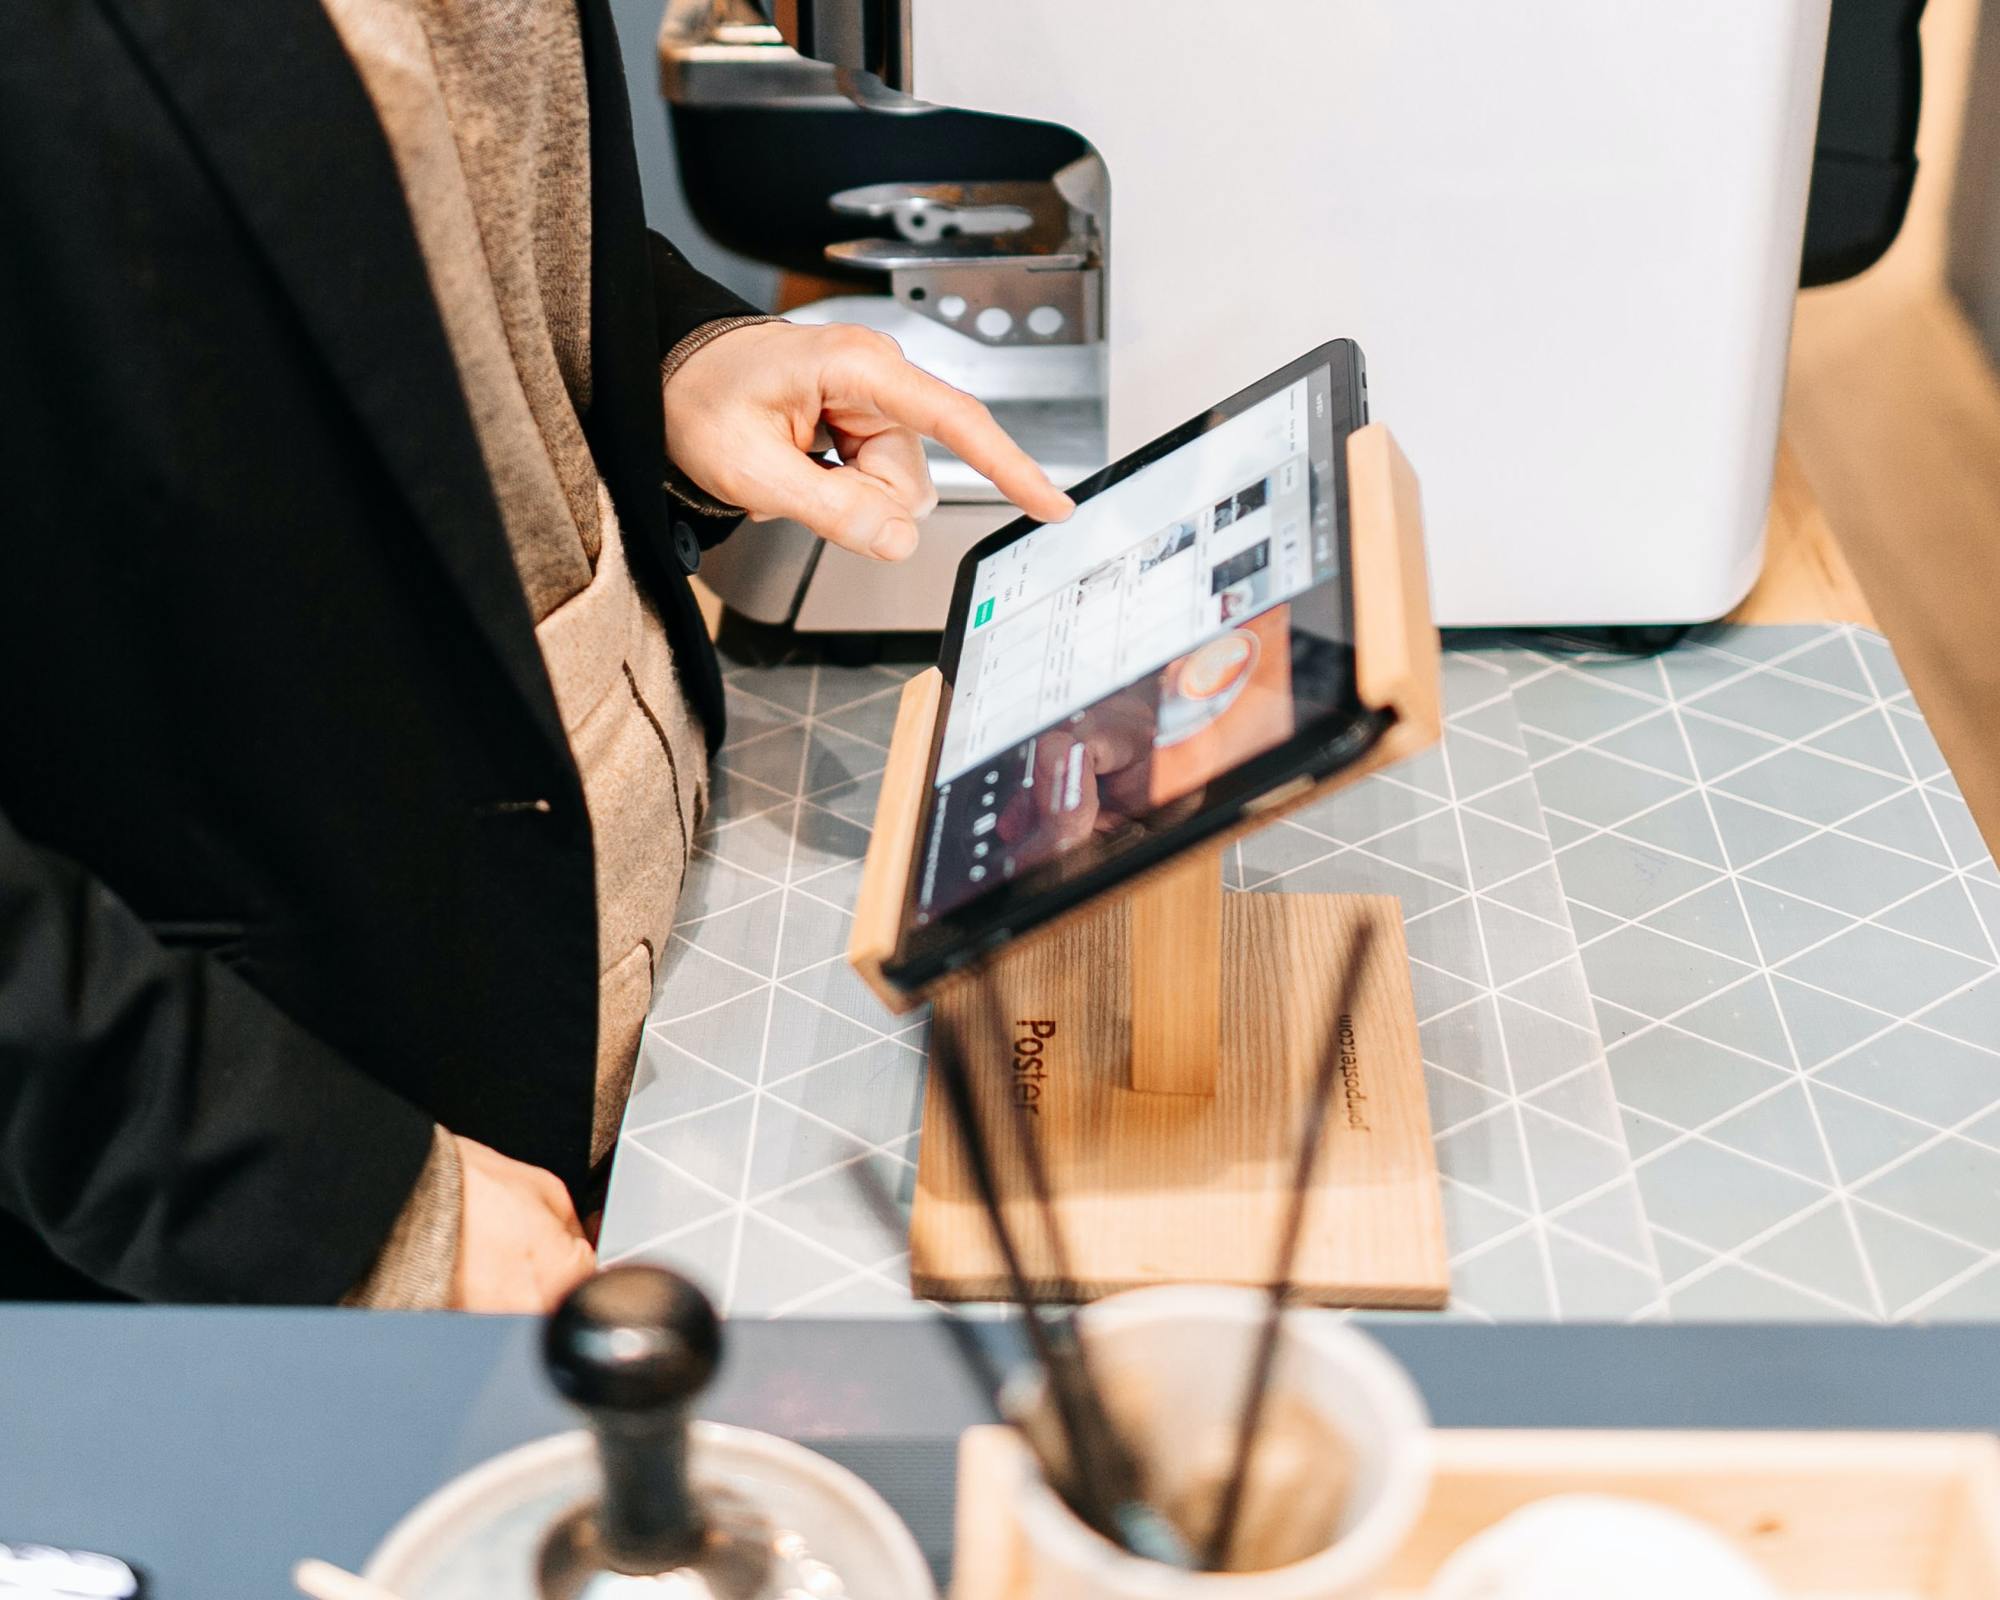 Strengthen loyal customer connections using Shopify POS